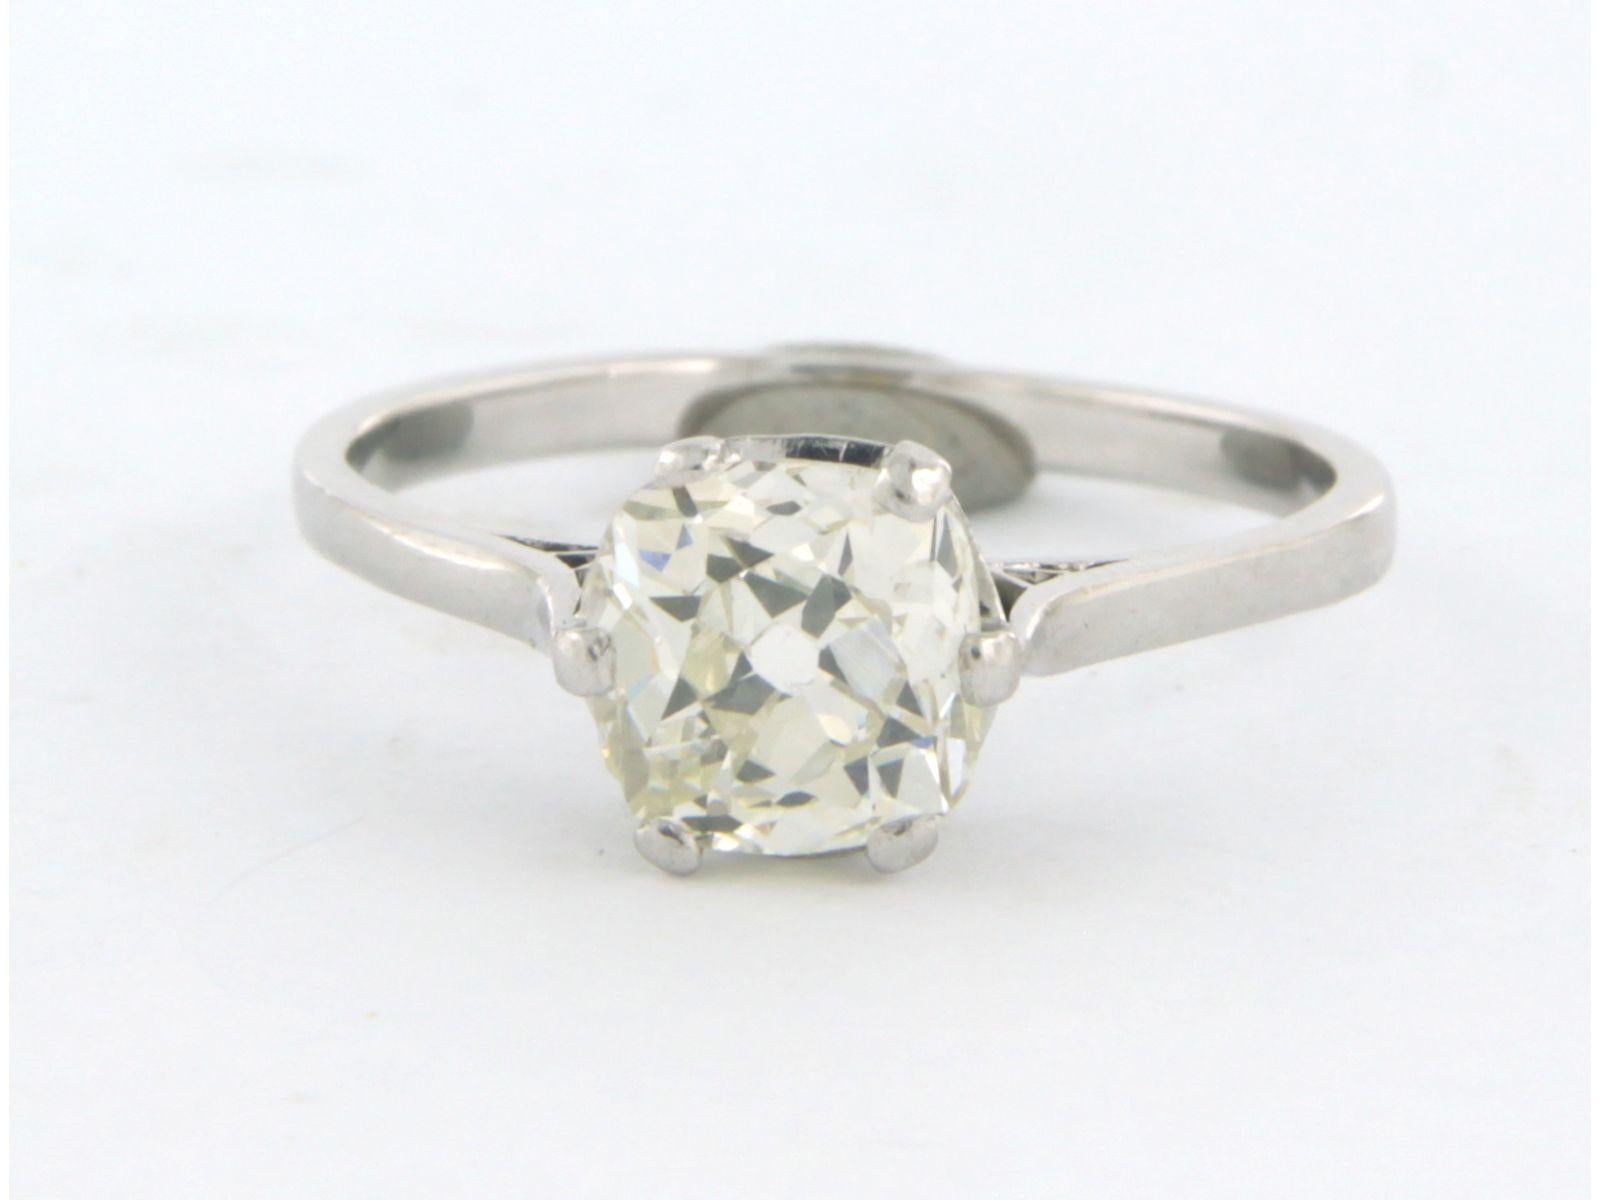 Platinum and 18k white gold solitaire ring set with old mine cut diamonds. 1.30ct - J/K - VS/SI - ring size U.S. 7.5 - EU. 17.75 (56)

detailed description:

the top of the ring is 7.6 mm by 8.5 mm wide by 6.7 mm high

weight 2.9 grams

ring size US